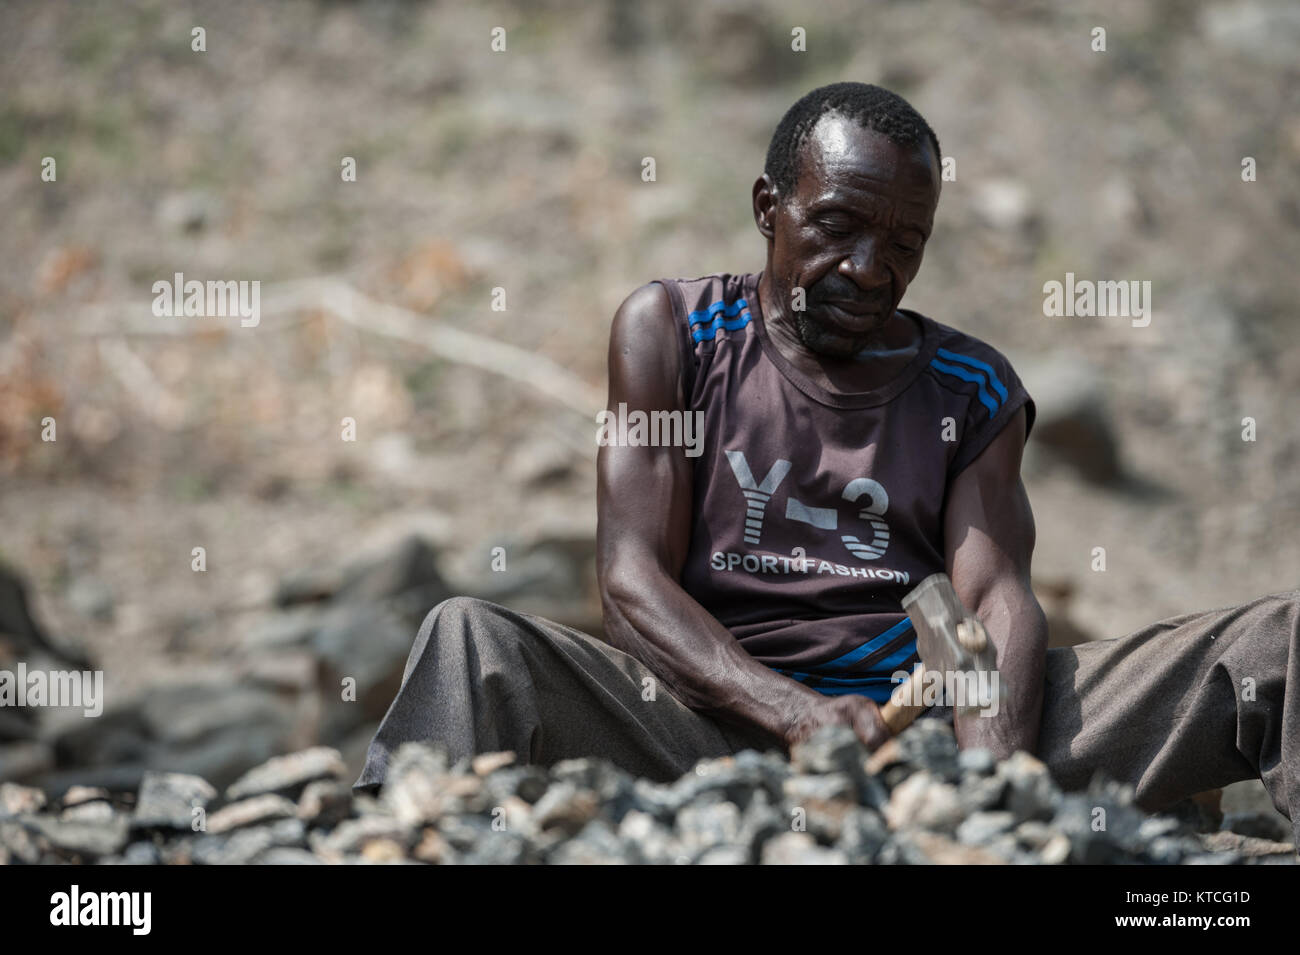 A man crushing rocks into gravel for the construction industry in Malawi Stock Photo